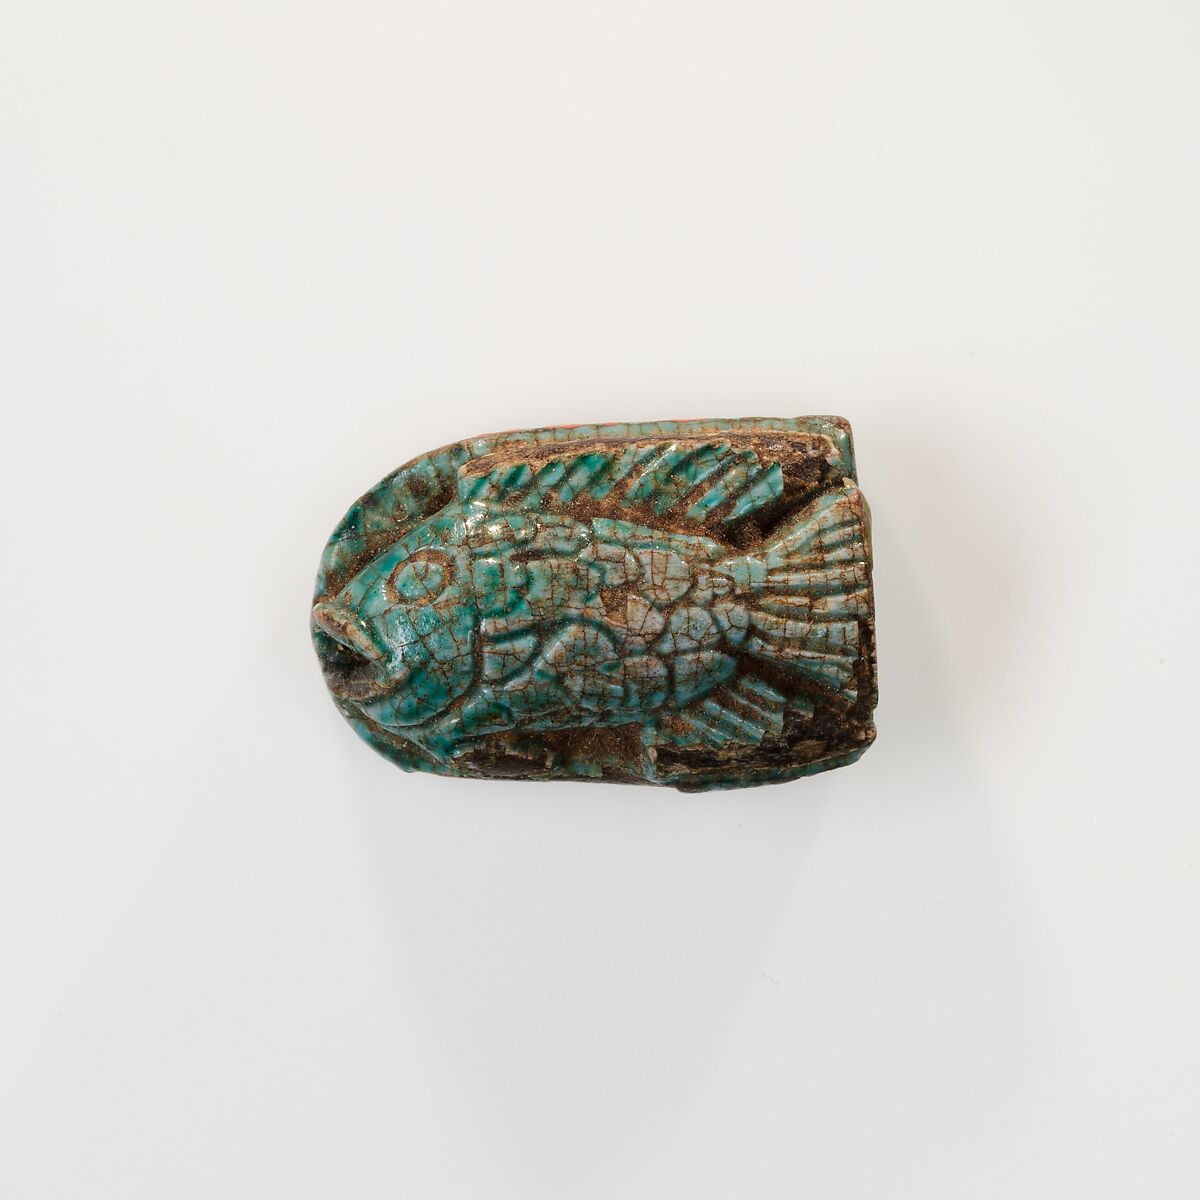 Fish Design Amulet Inscribed with the cartouche of Queen Ahmose Nefertari, Steatite (glazed) 